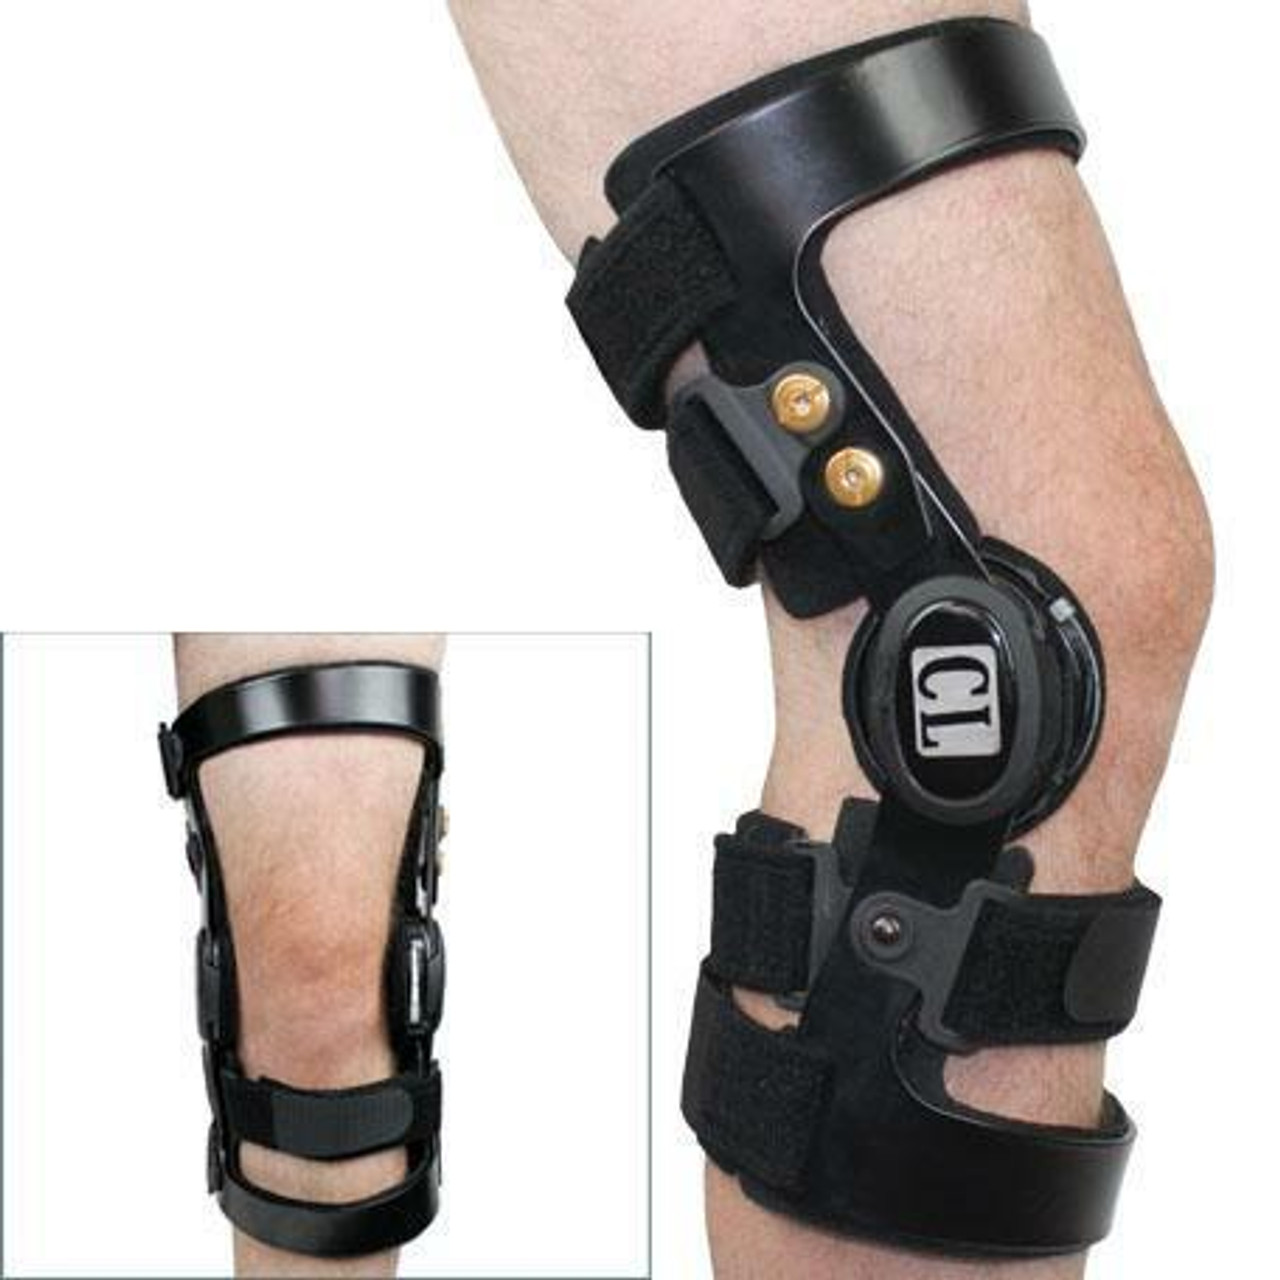 Deluxe Hinged Knee Brace ON SALE - FREE Shipping